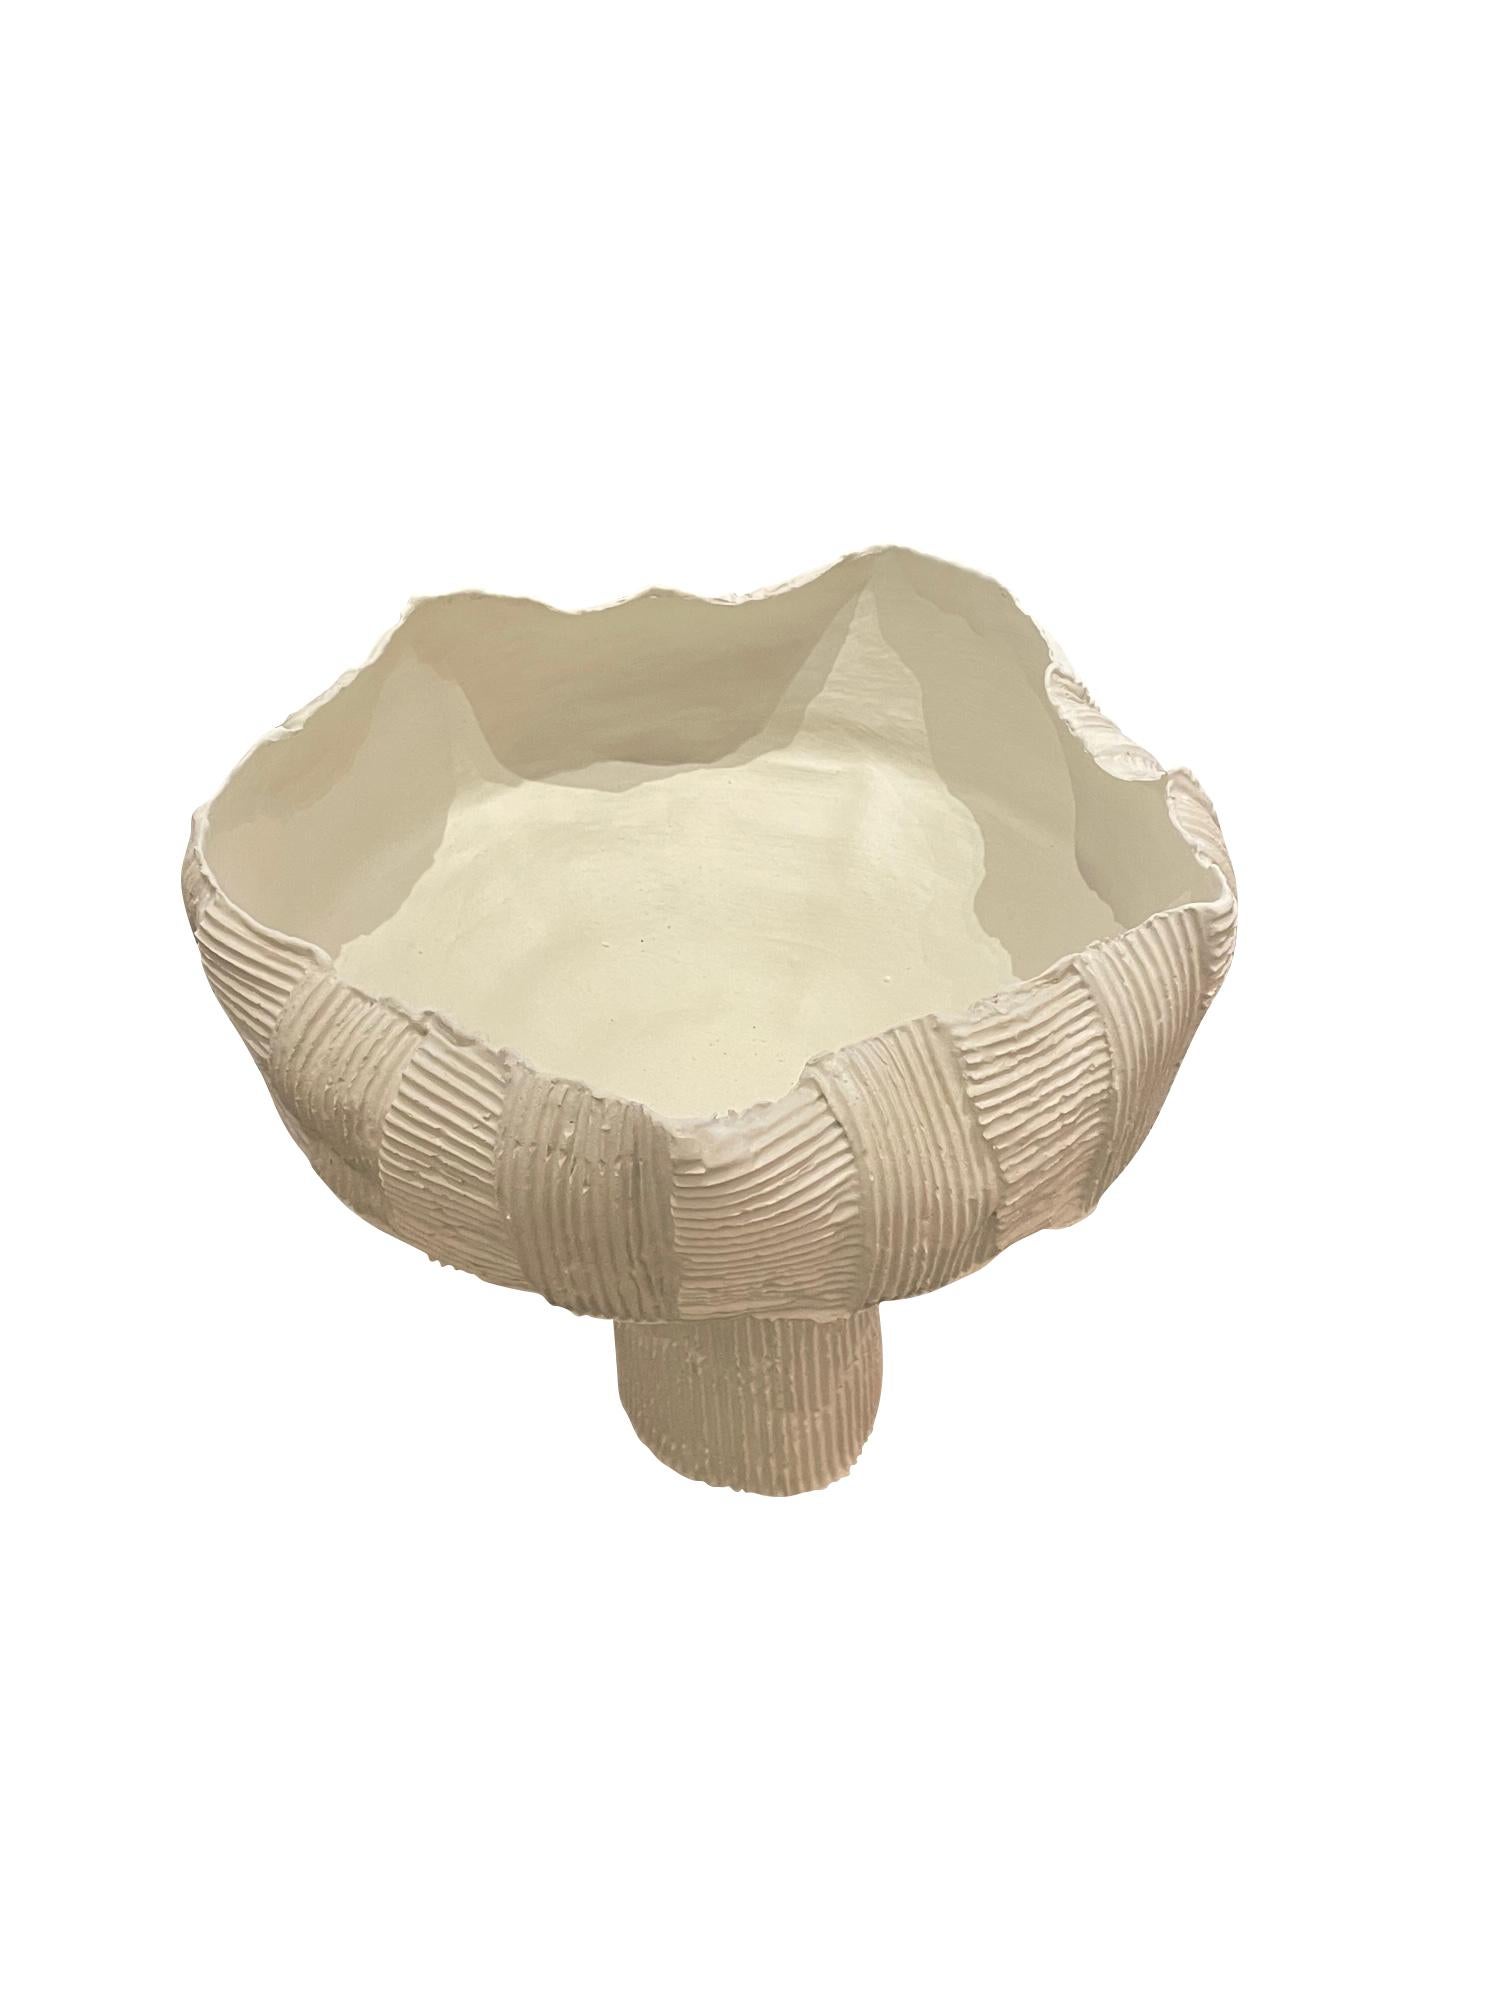 Contemporary Italian white porcelain footed bowl with  all around corrugated cardboard design.
Handmade